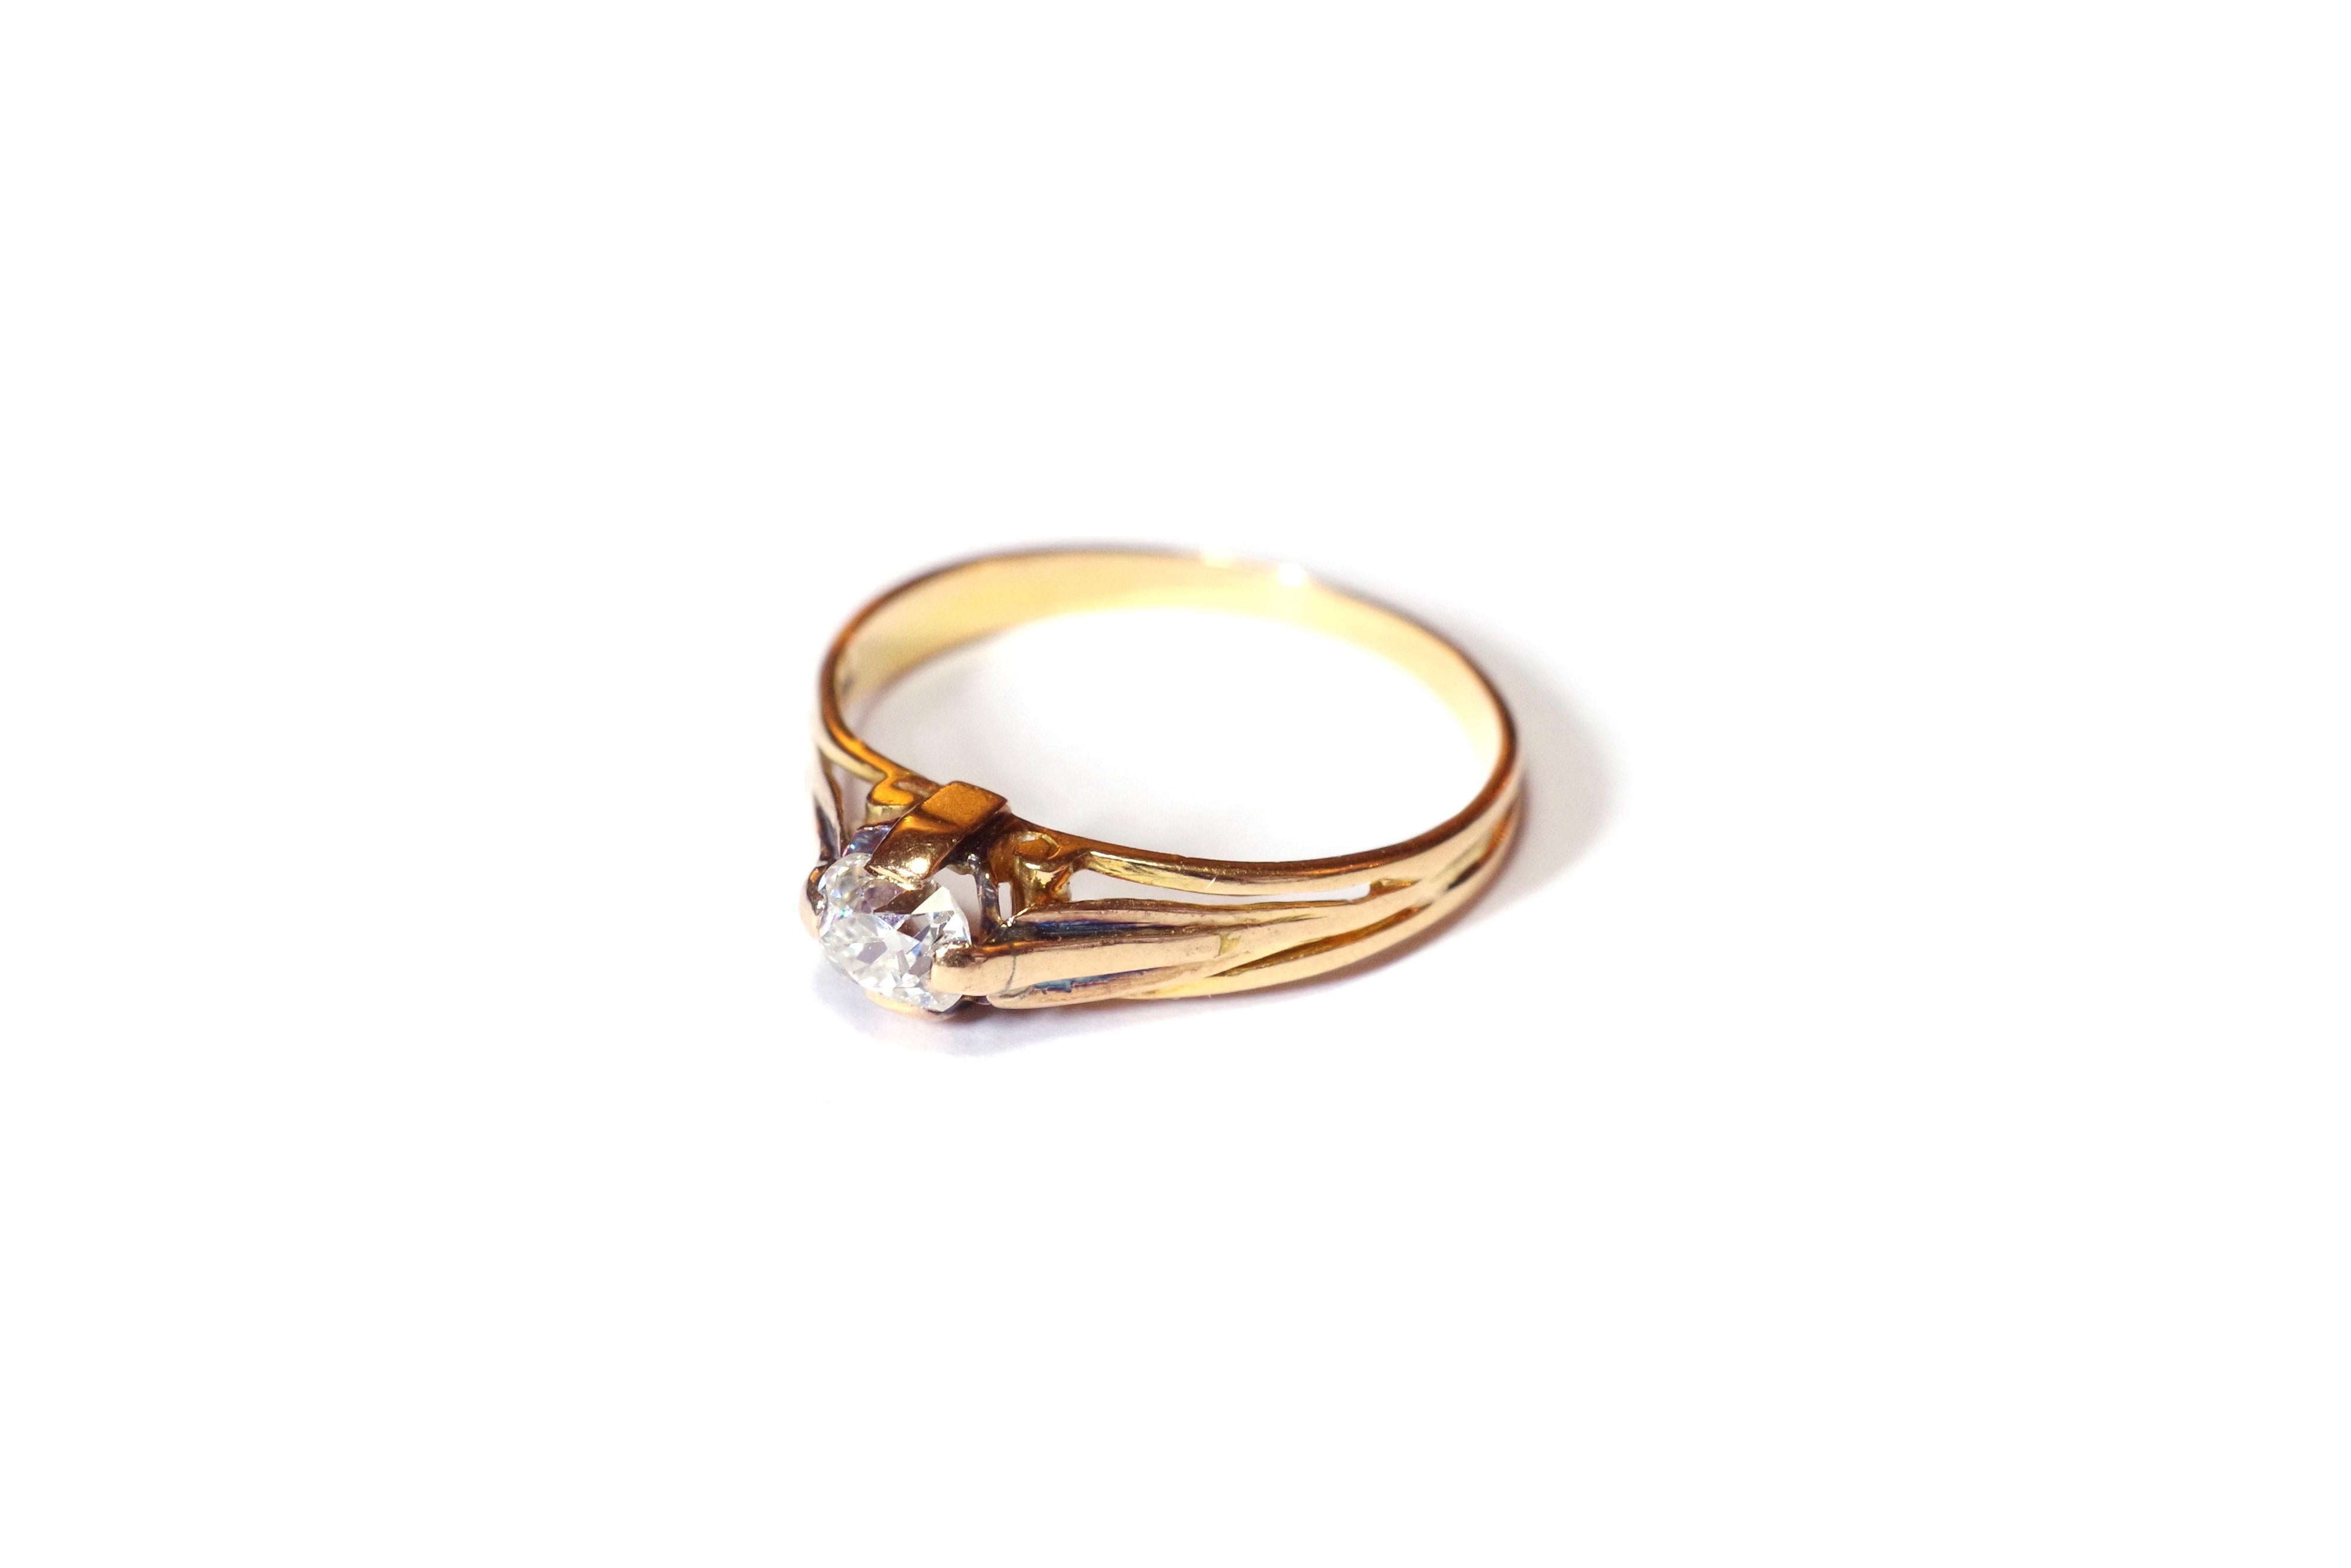 Late Victorian Antique Victorian Solitaire Diamond Ring in 18 Karat Pink Gold, Wedding Ring For Sale